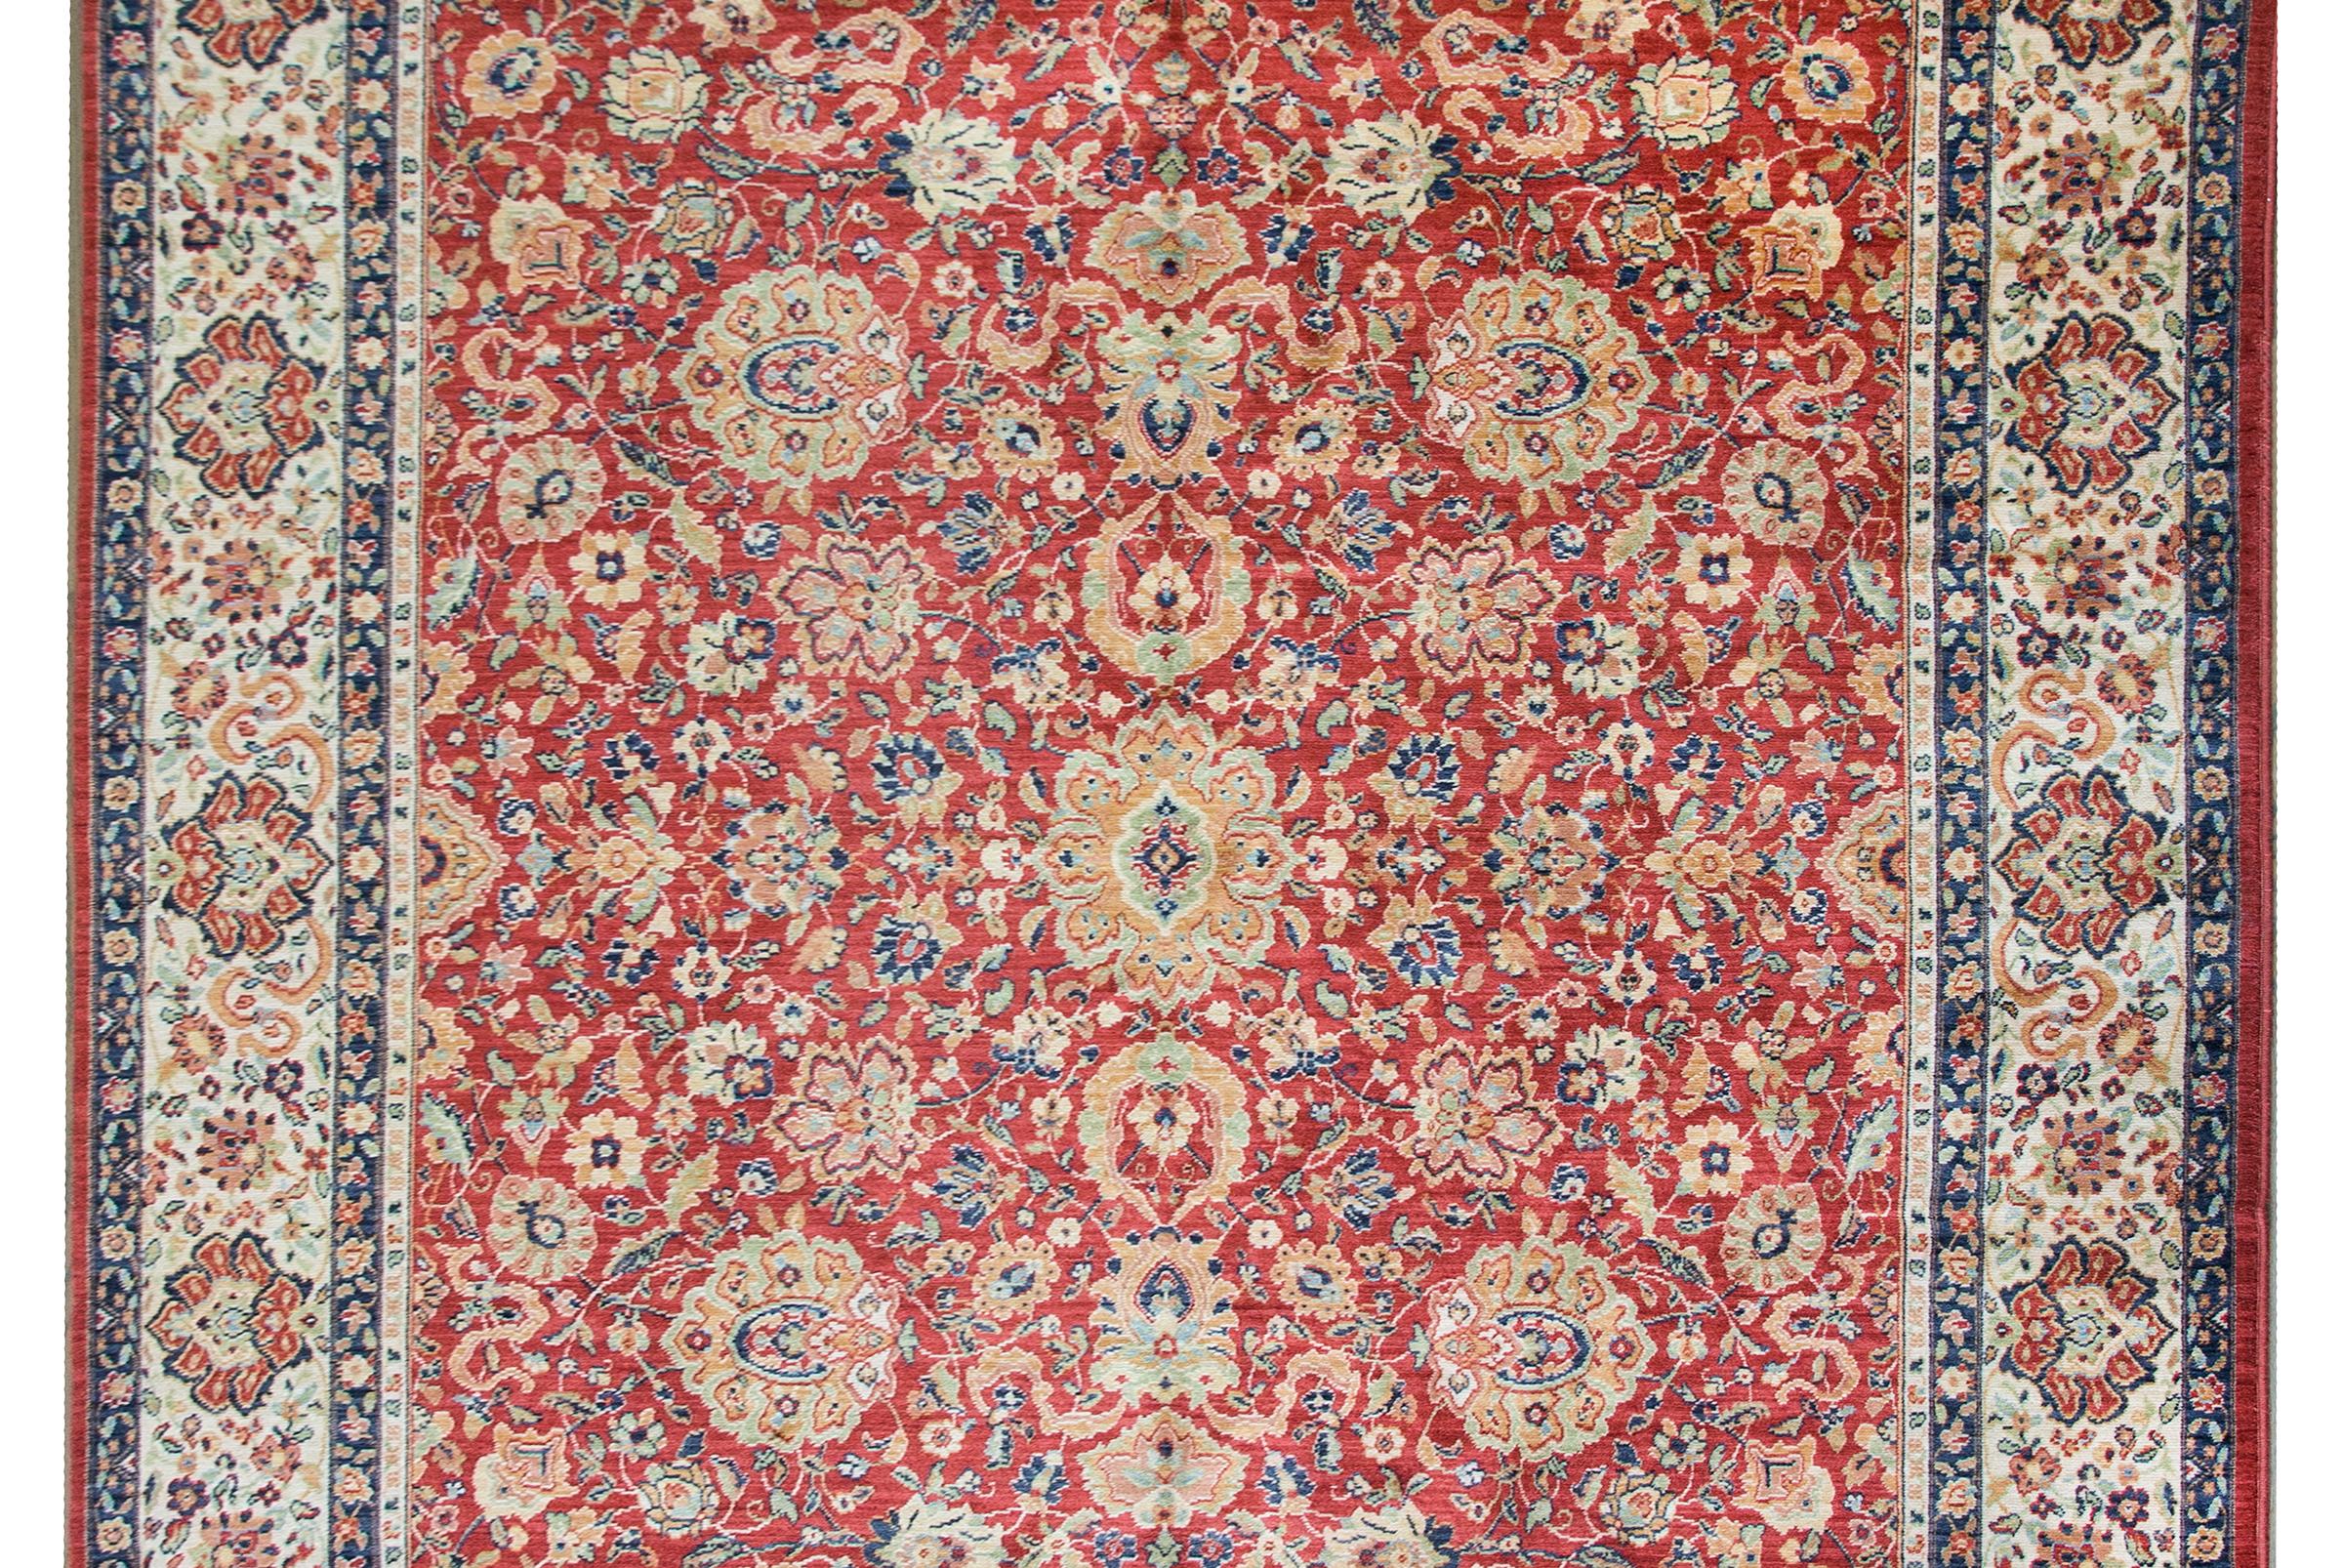 A beautiful late 20th century Karastan rug hand-knotted with a Mahal pattern containing a large mirrored stylized floral and scrolling vine pattern surrounded by a wide border with a repeated floral pattern flanked by pairs of thin petite floral